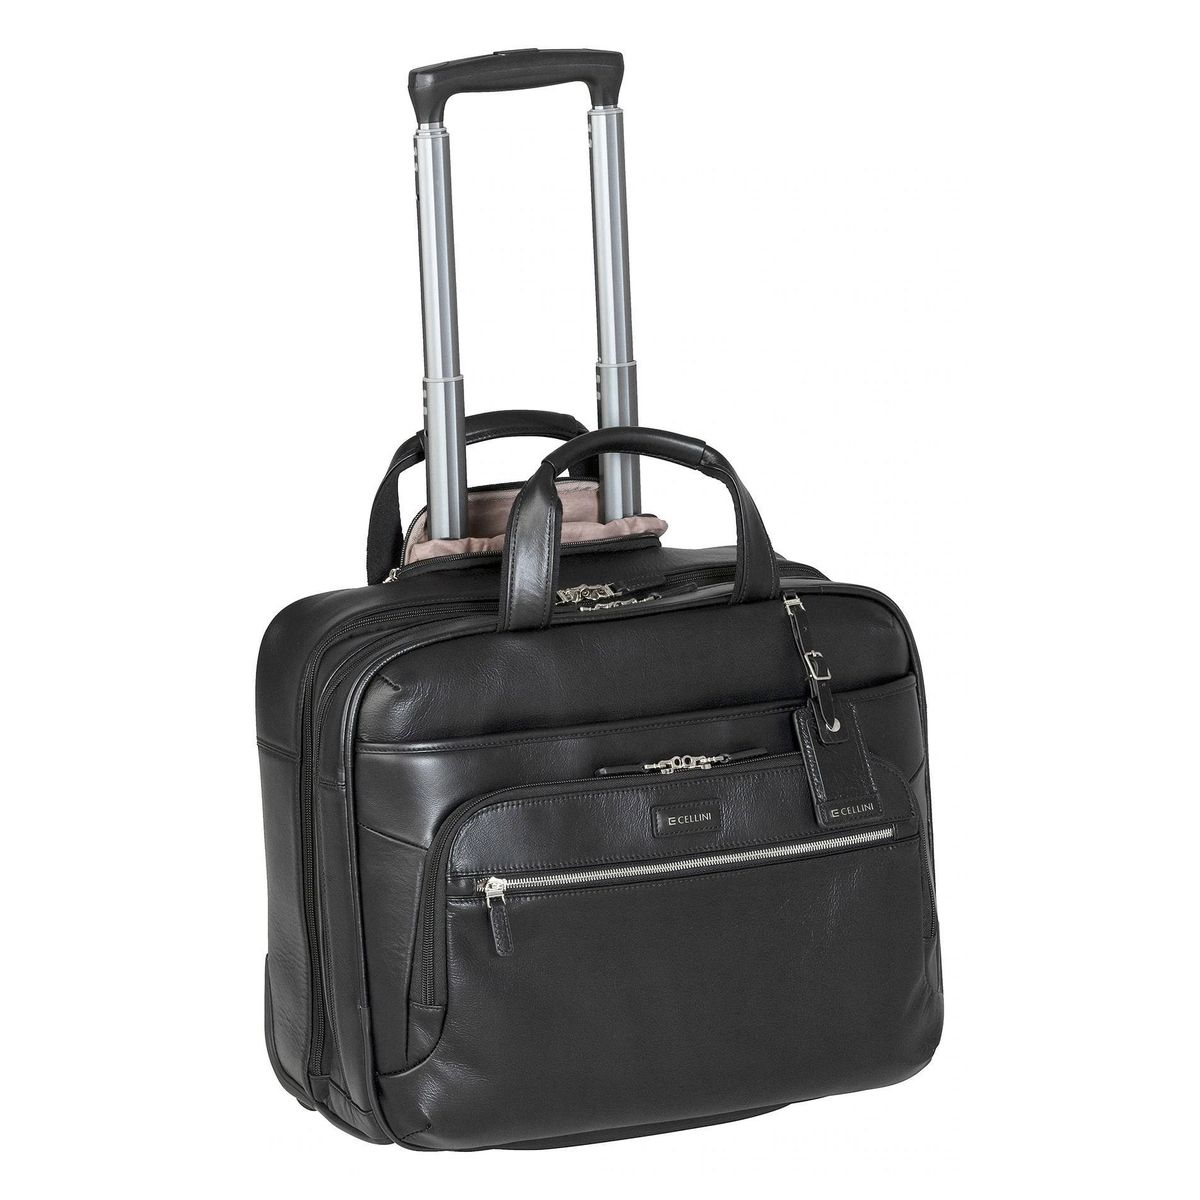 Cellini Infinity Leather Business Trolley Case - Laptop Bag - Black ...